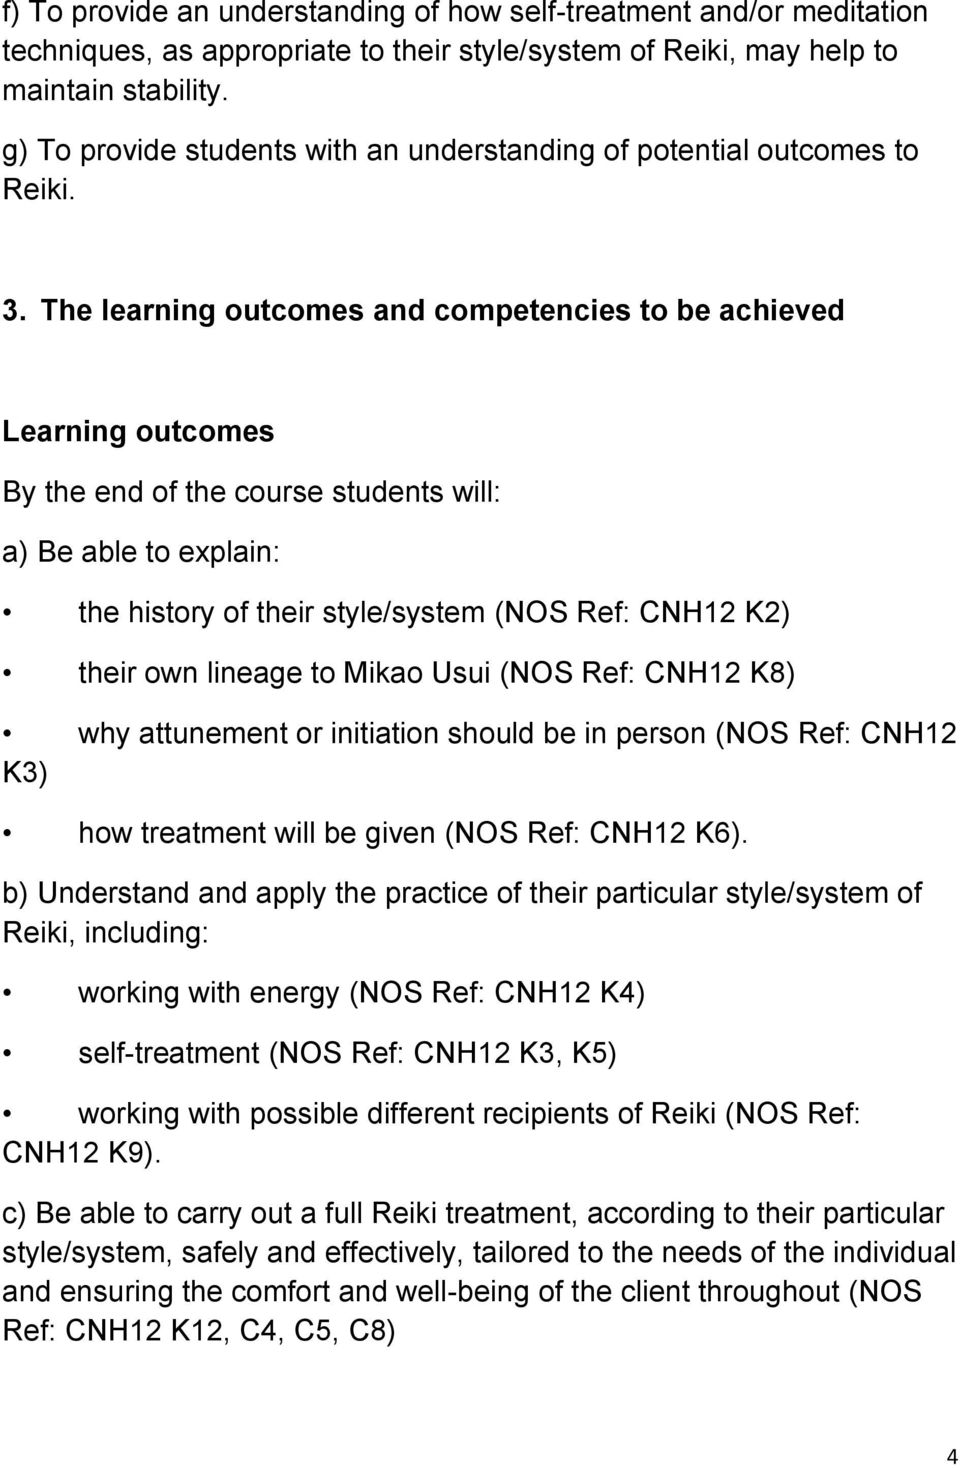 The learning outcomes and competencies to be achieved Learning outcomes By the end of the course students will: a) Be able to explain: the history of their style/system (NOS Ref: CNH12 K2) their own